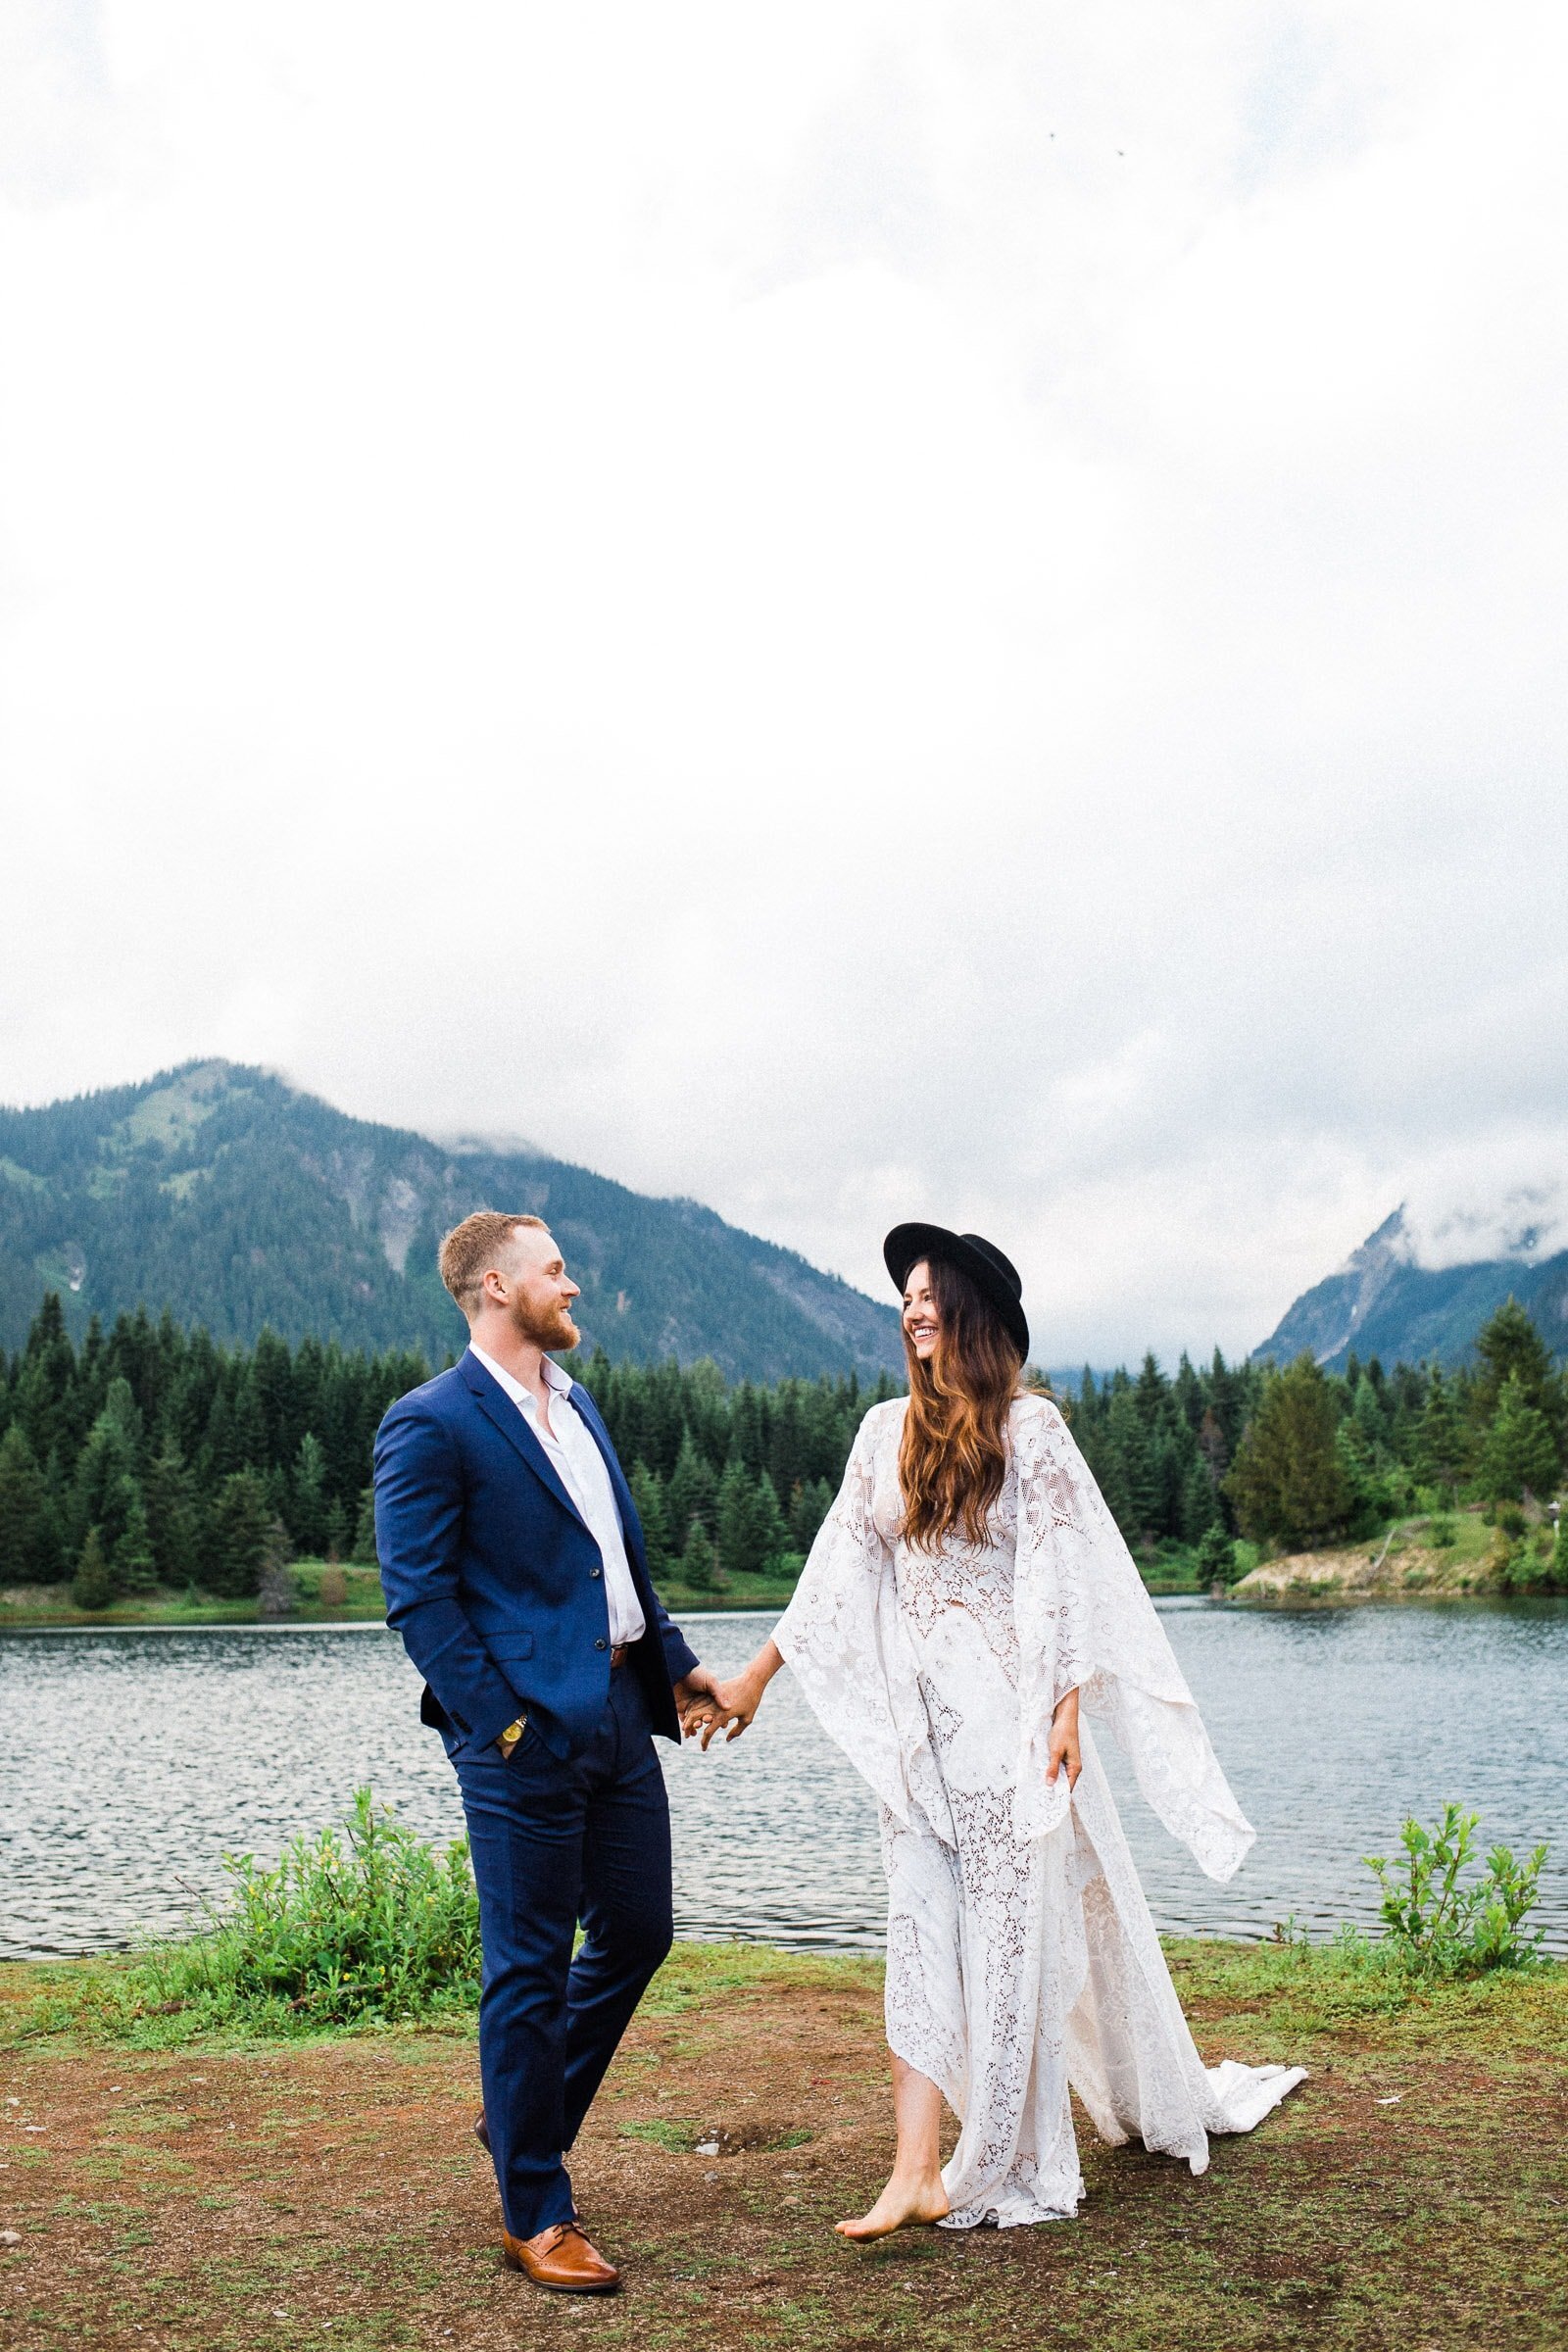 Couple holding hands and walking barefoot in front of mountains and lakeside in Washington State